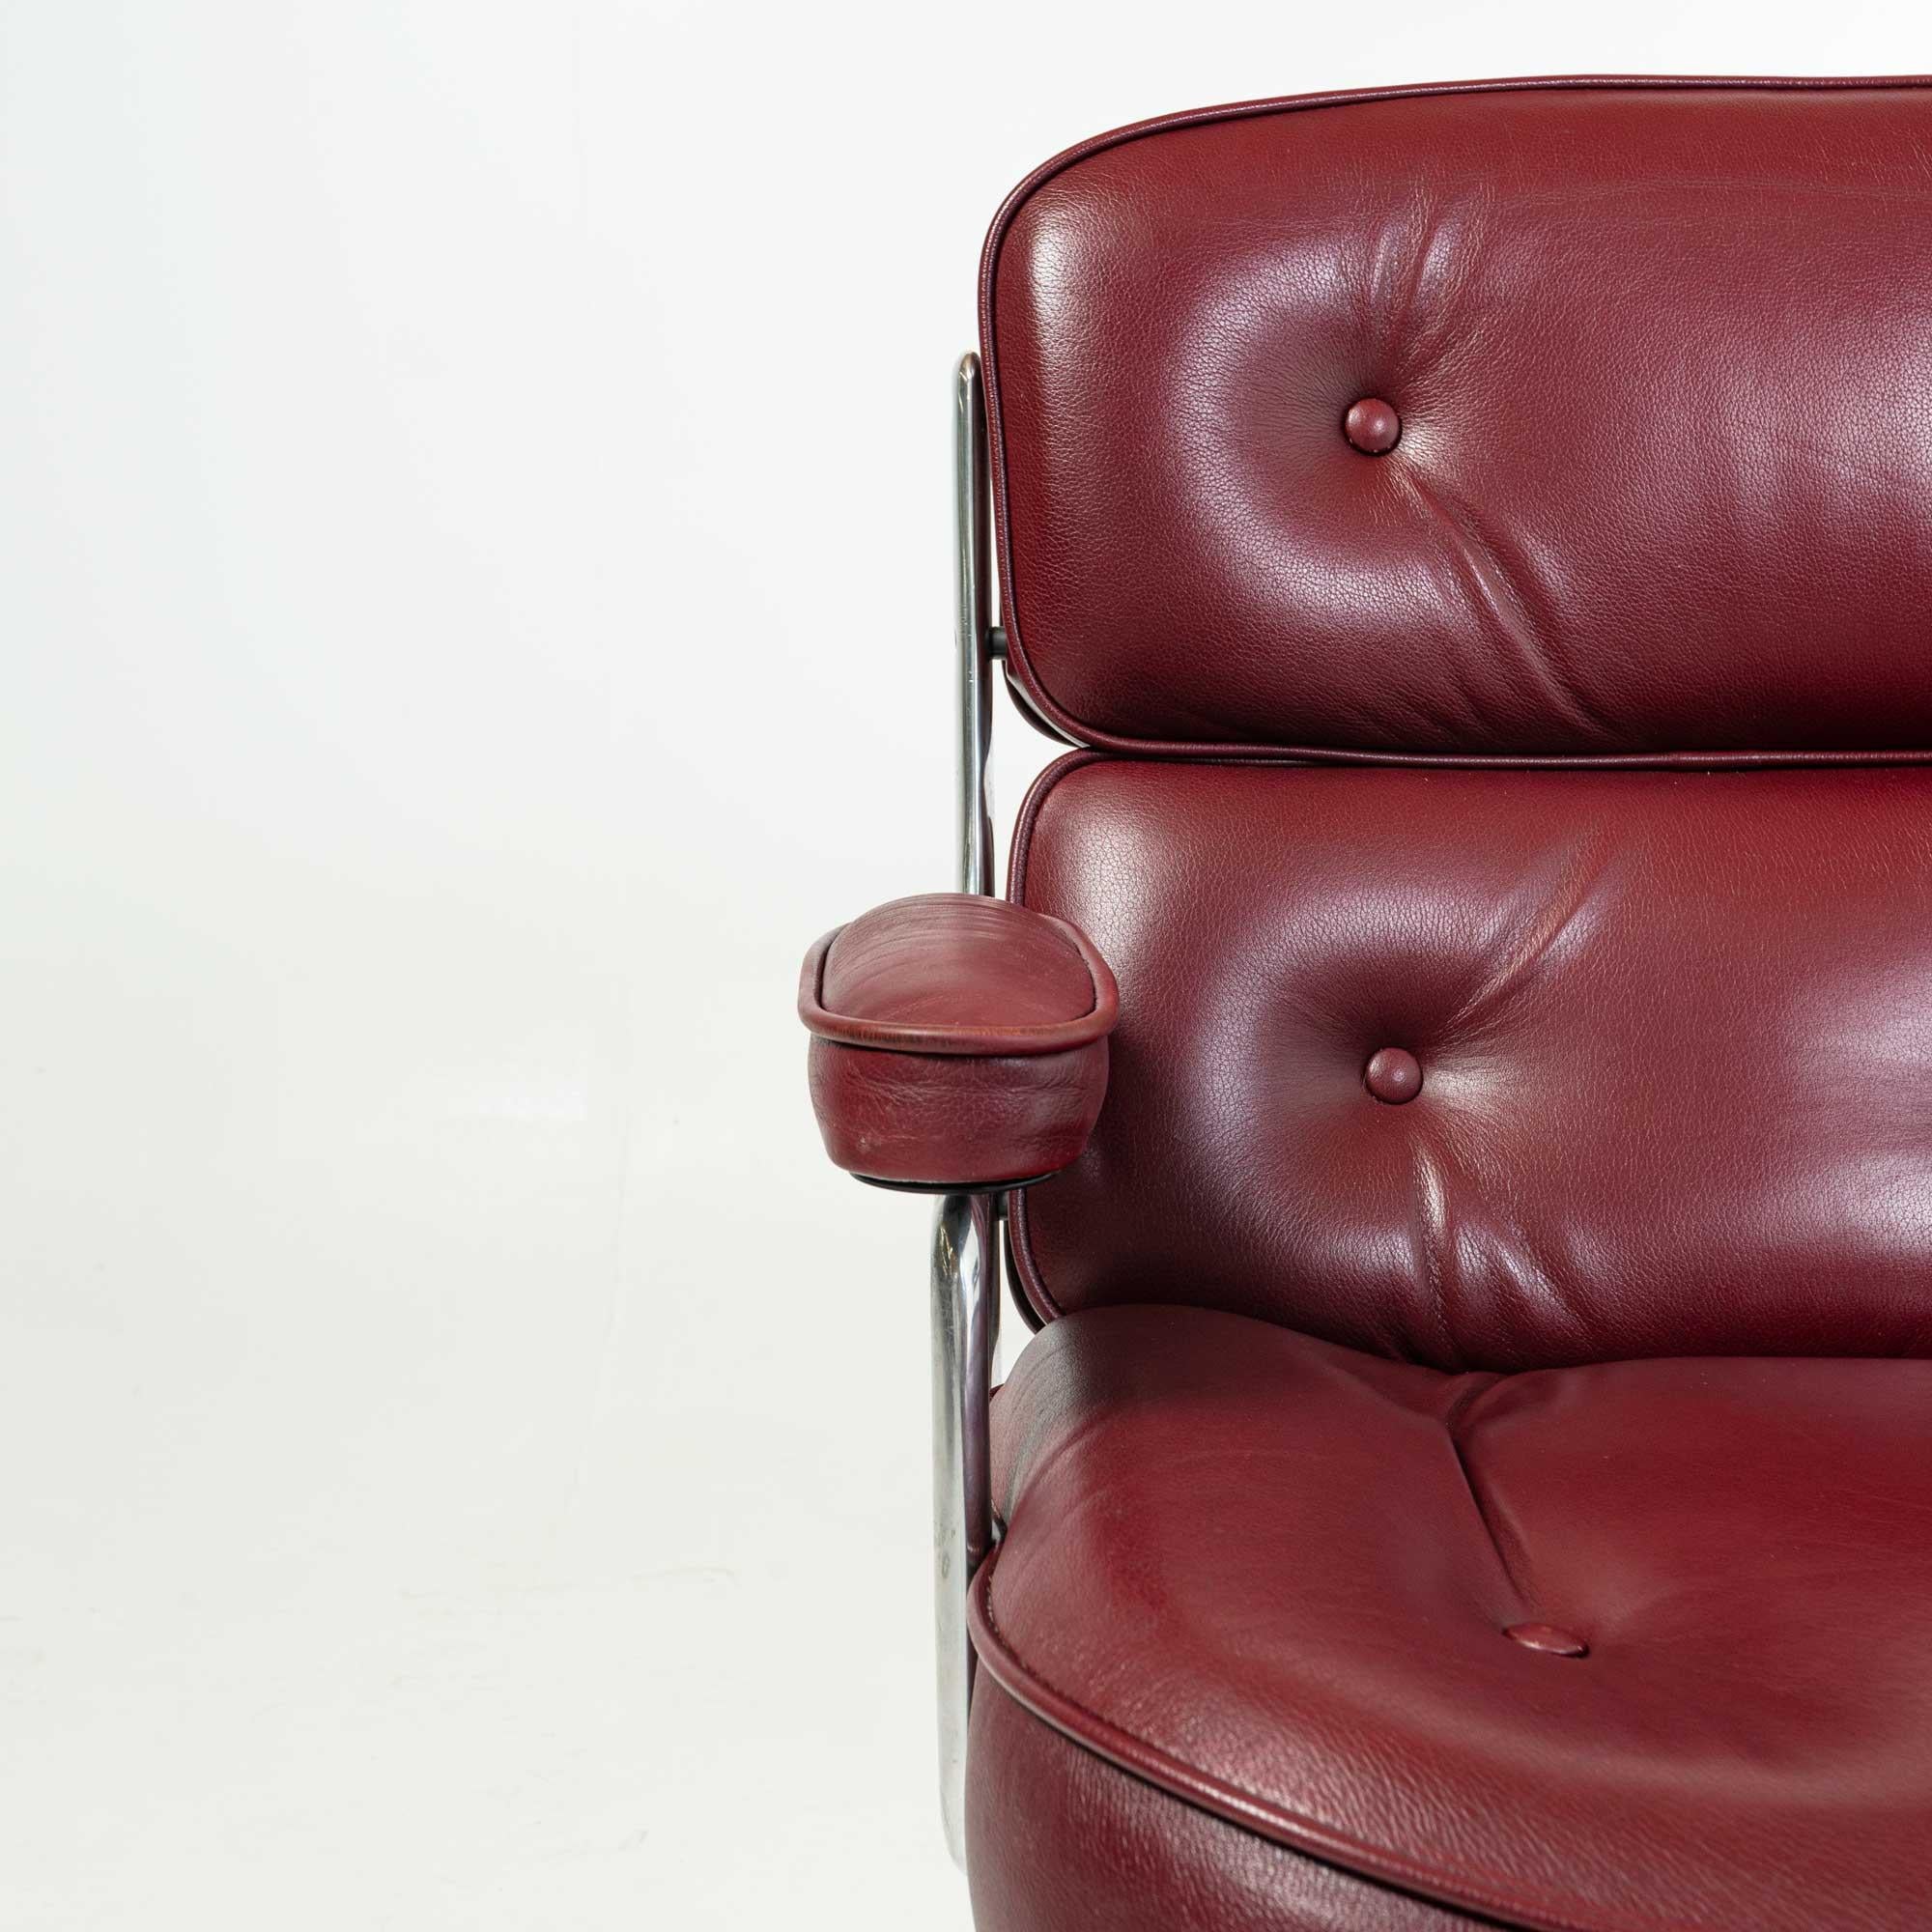 North American Eames Time Life Desk Chair in Original Maroon Leather